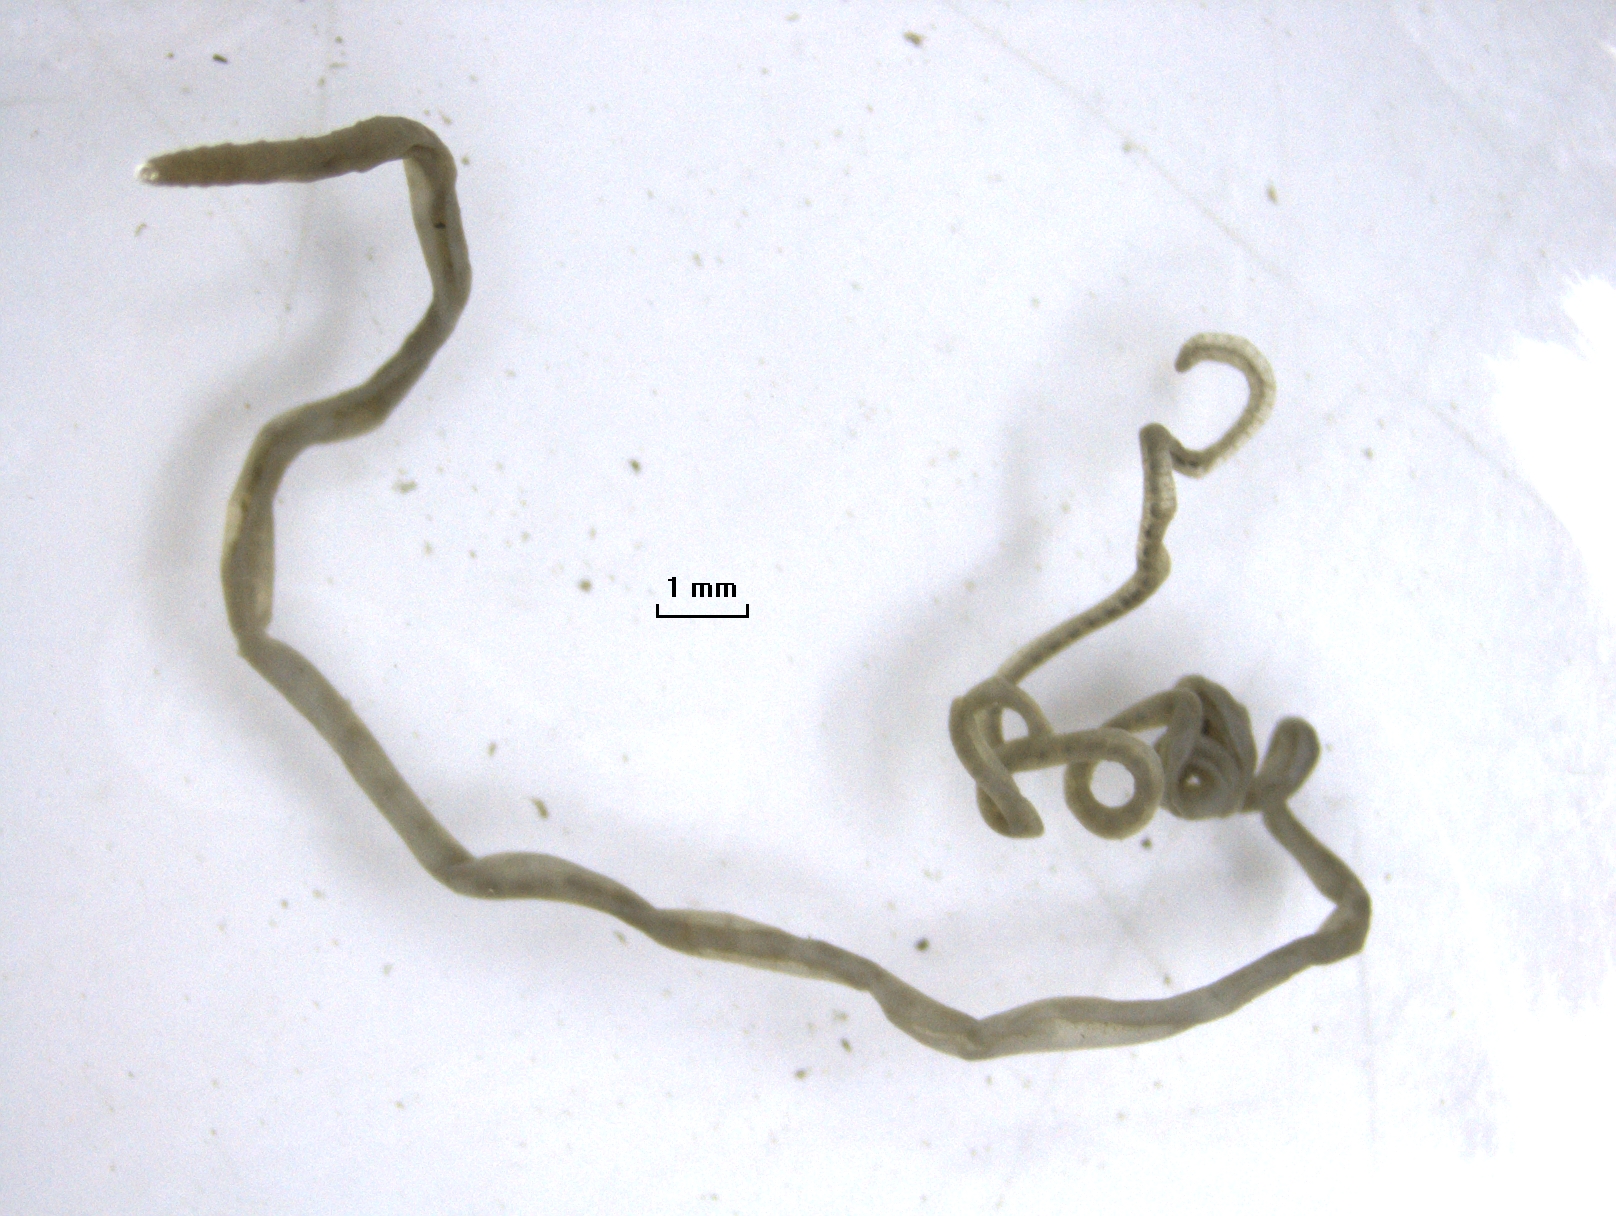 A microscope photo of a very long worm that is curled and twisted. There is a scale bar labelled "1 mm."